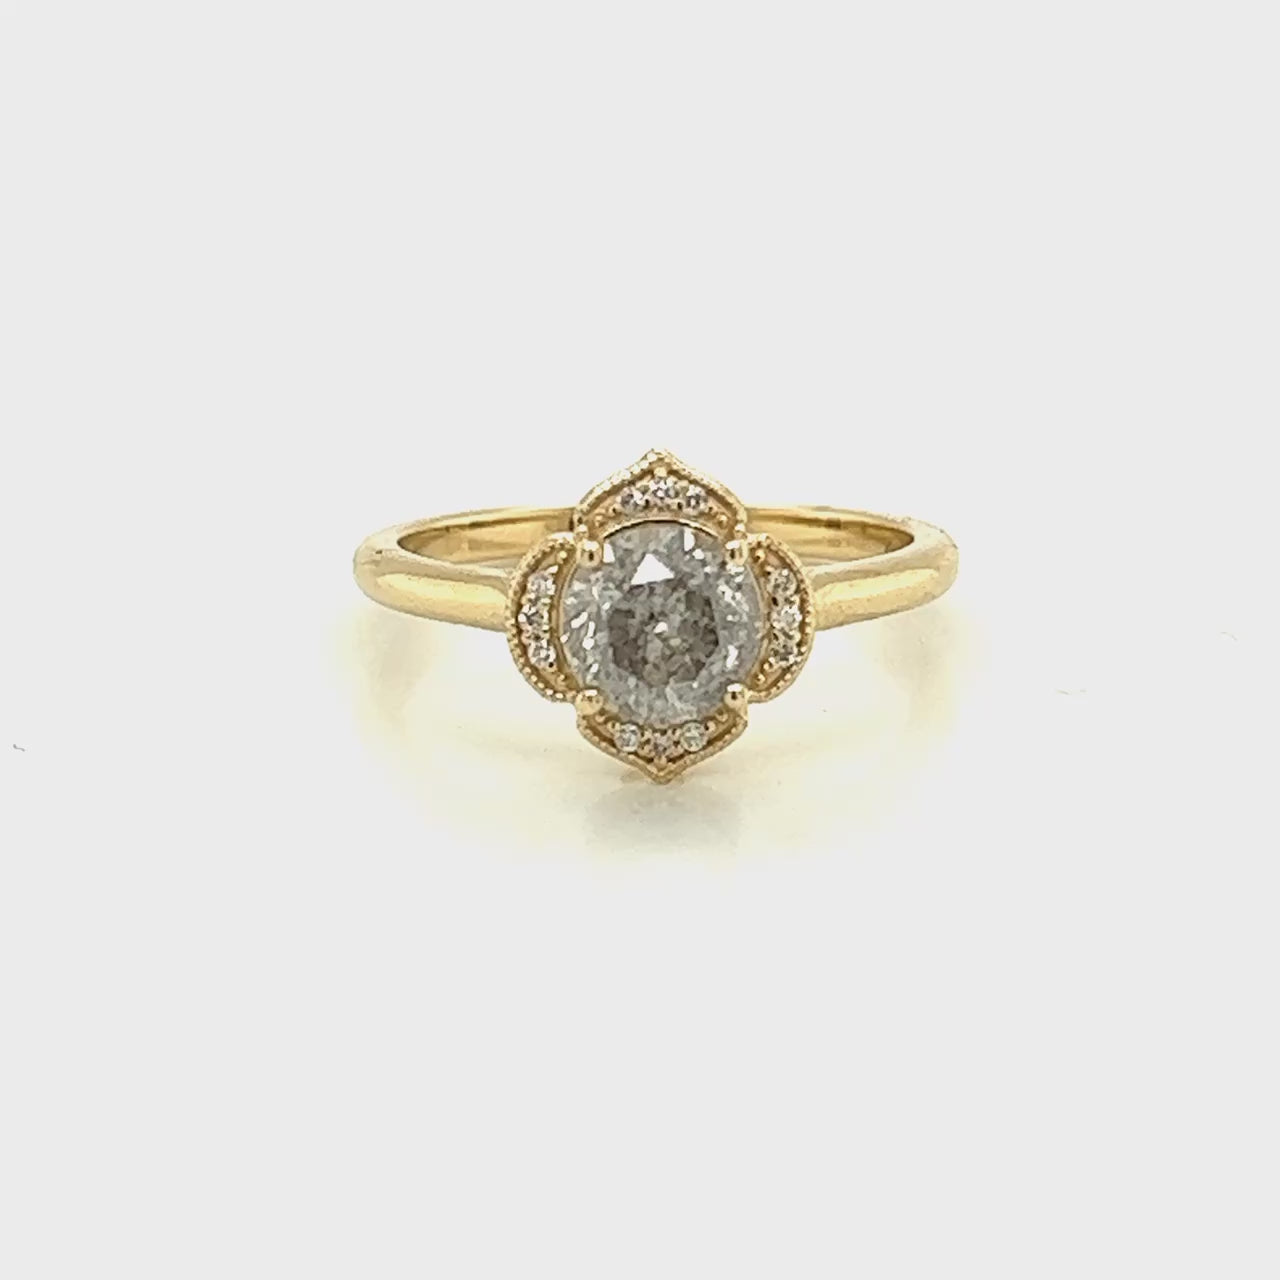 Clementine Ring with a 1.05 Carat Round Light Gray Salt and Pepper Diamond and White Accent Diamonds in 14k Yellow Gold - Ready to Size and Ship